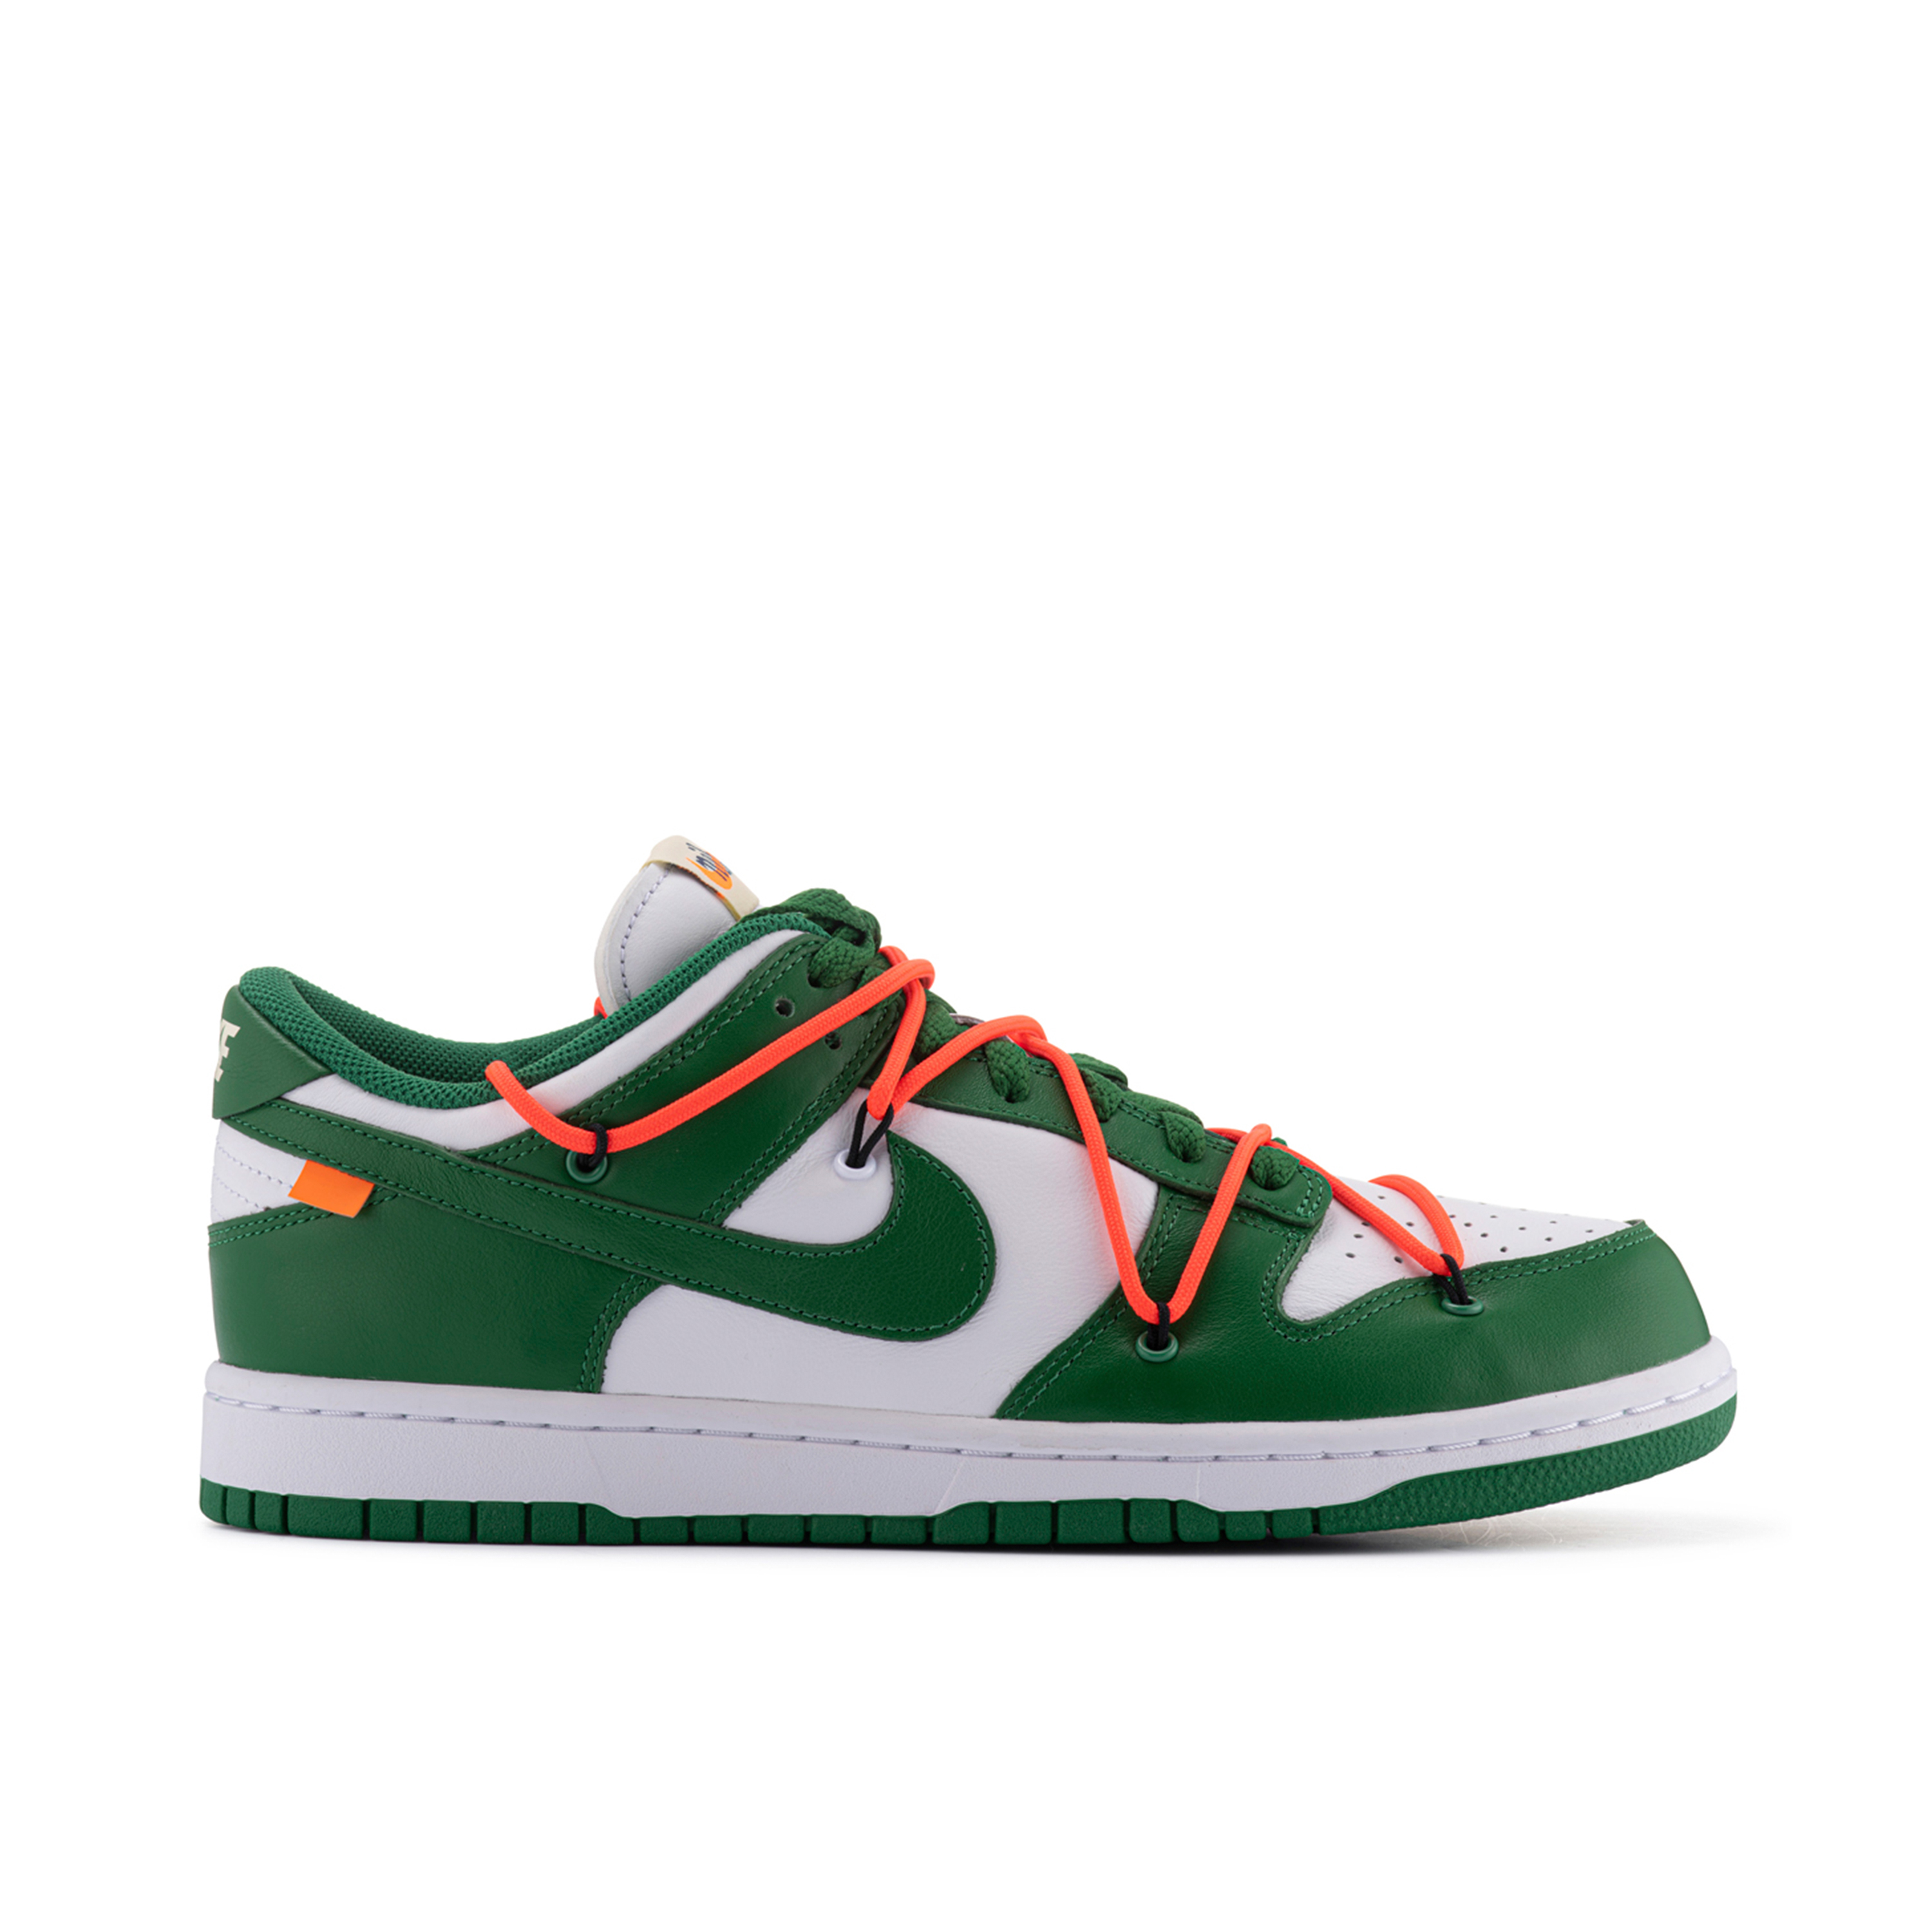 OFF-WHITE x NIKE DUNK LOW "PINE GREEN"